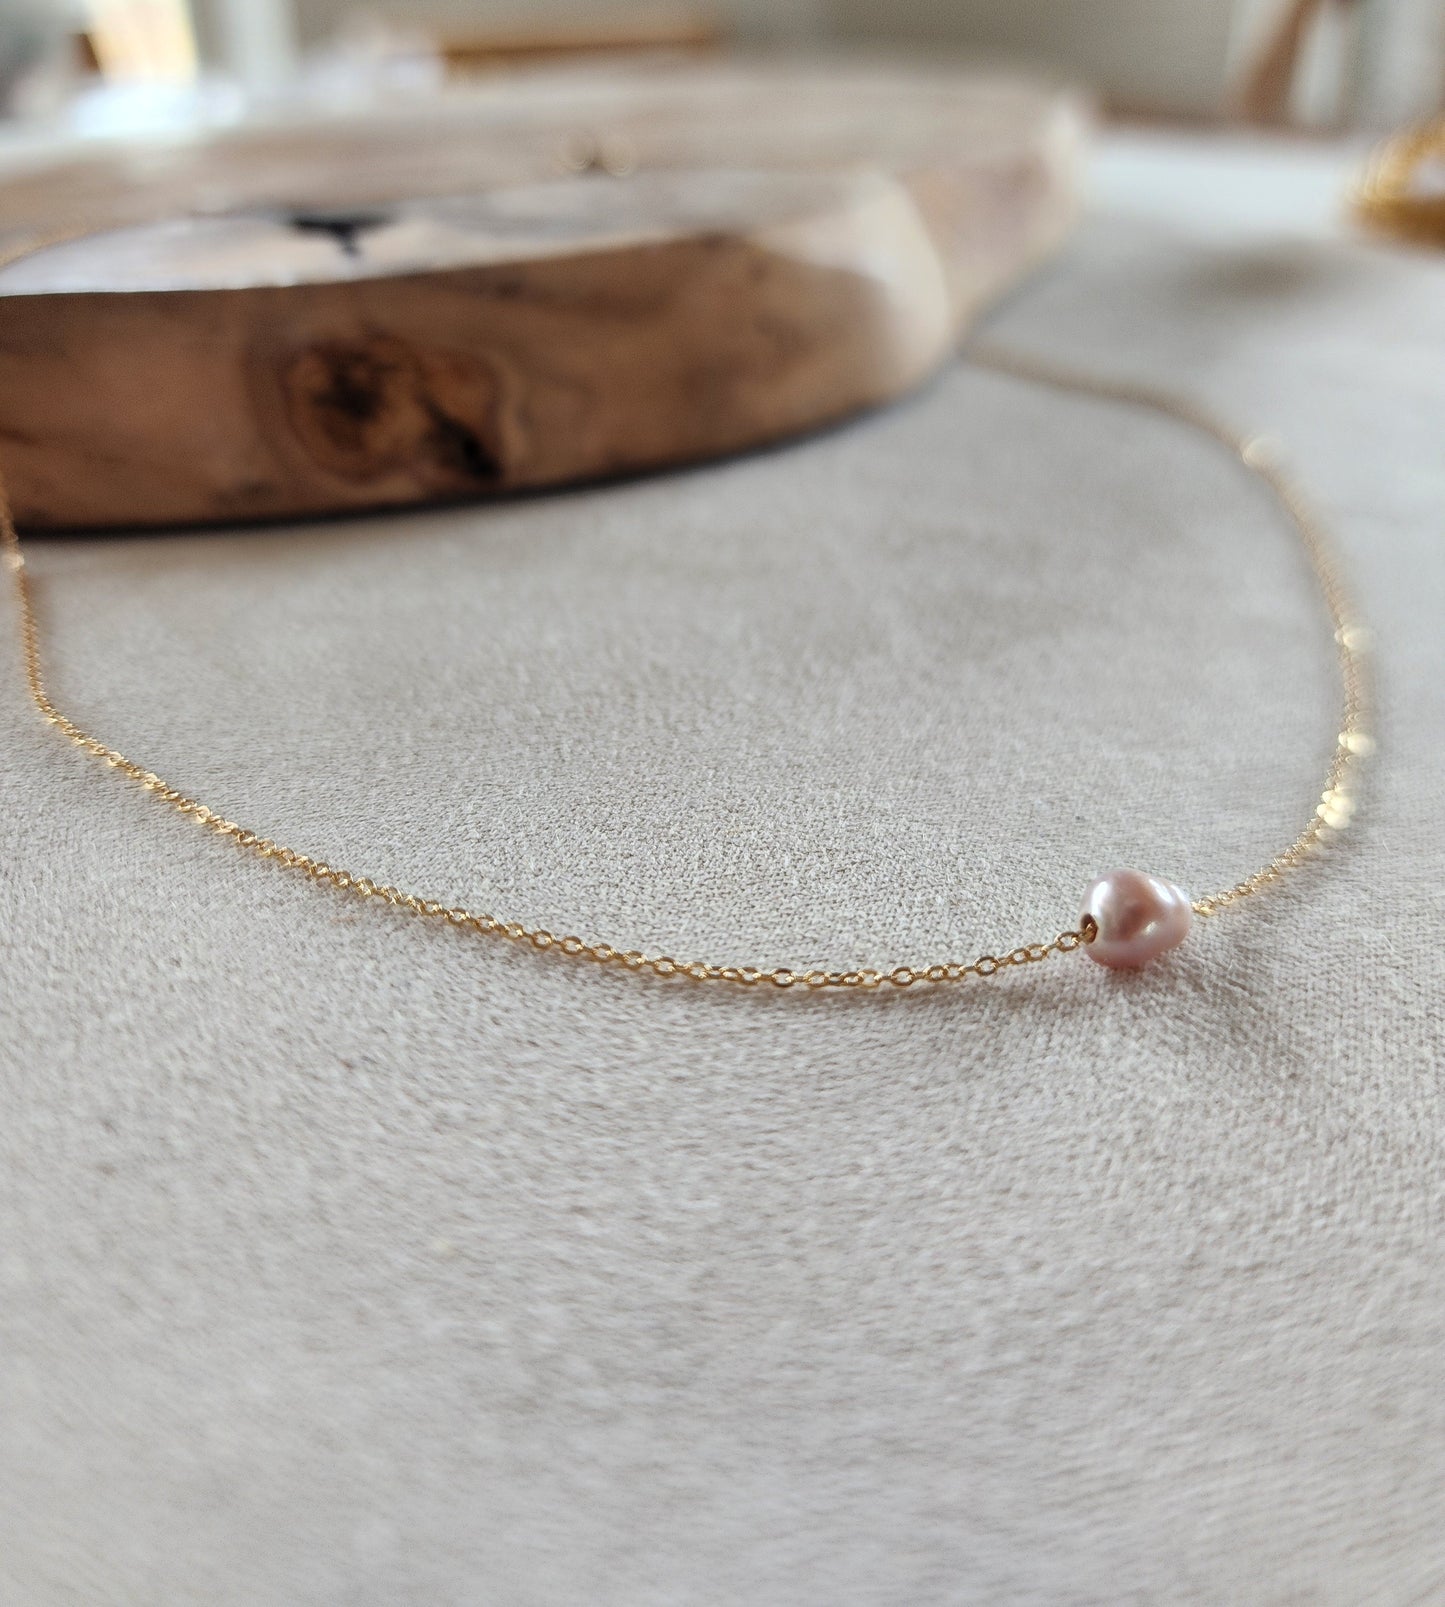 Rose Freshwater Pearl Necklace